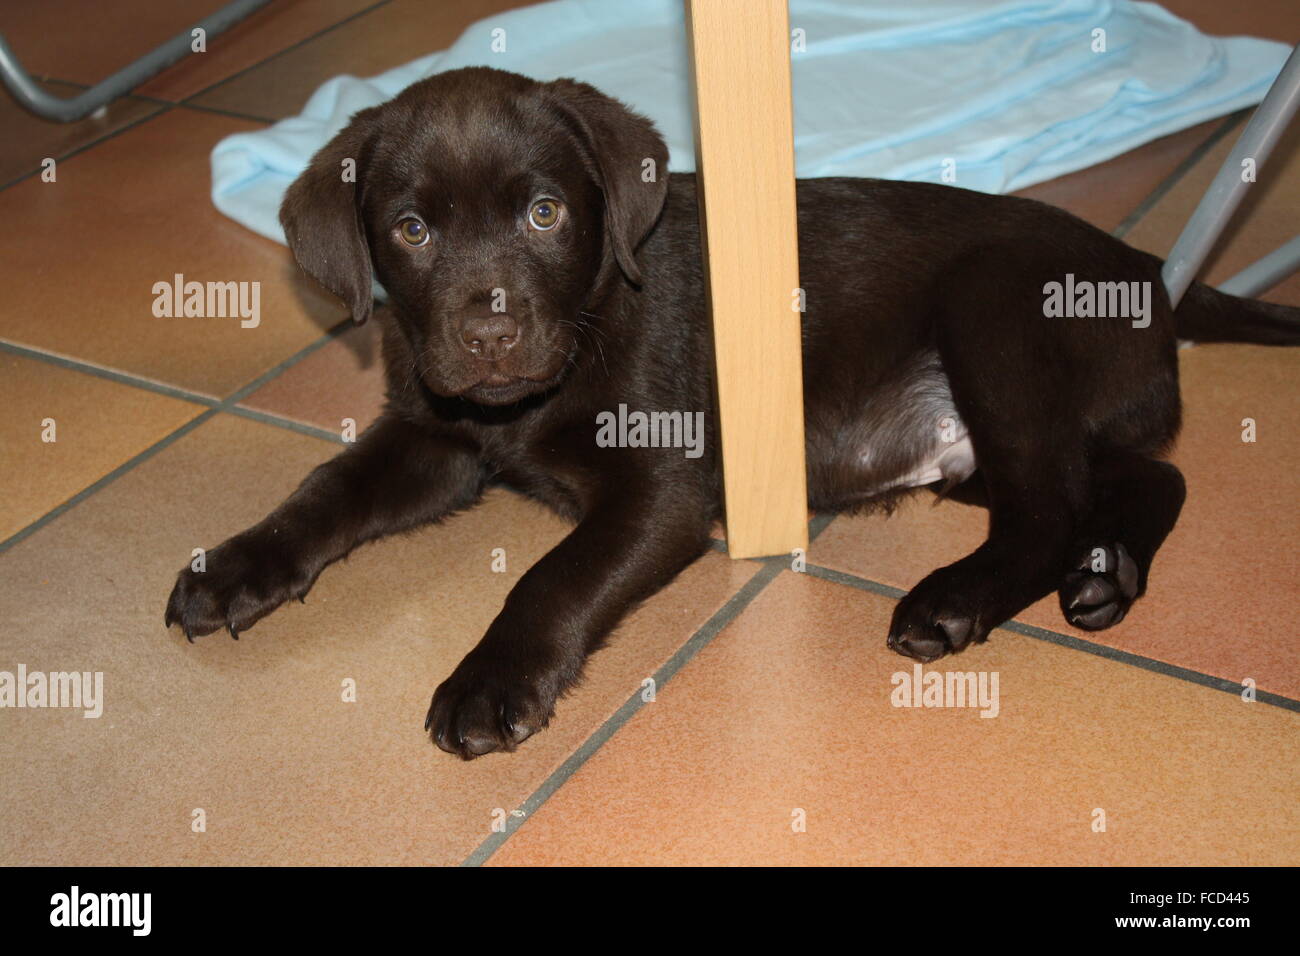 Puppy Dog Under A Table Stock Photo